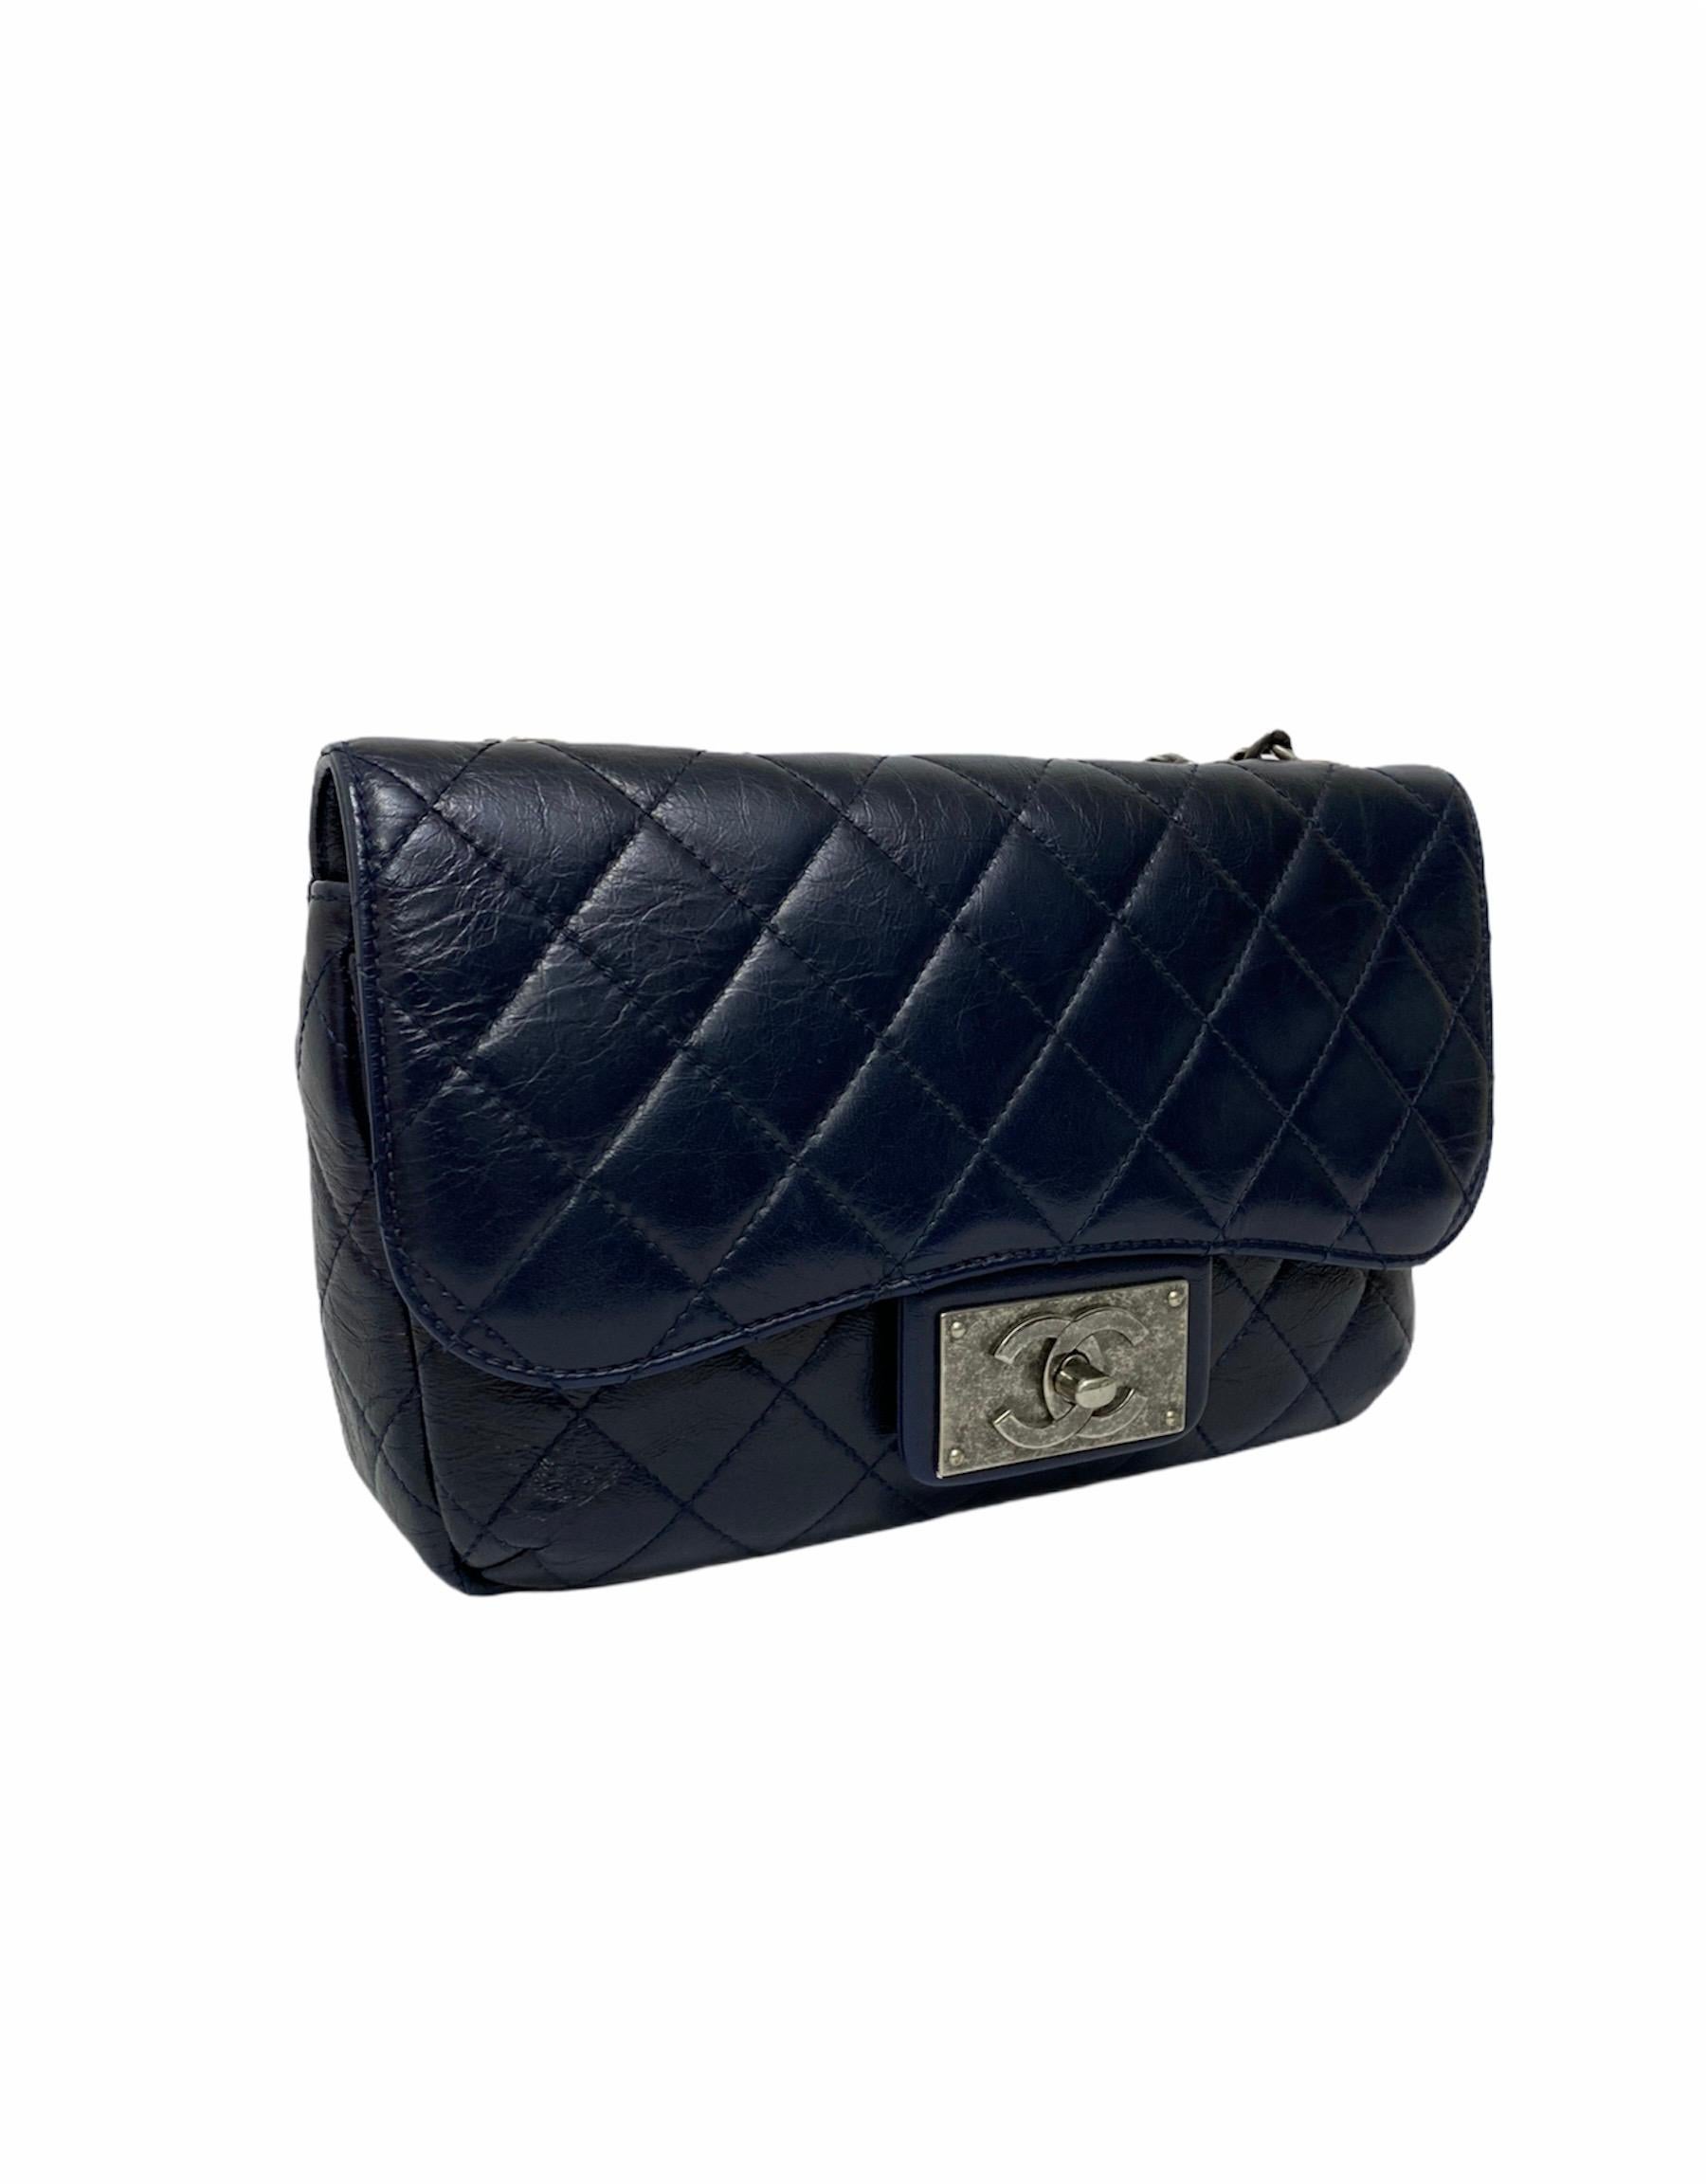 Chanel designer bag made of blue leather with silver hardware. 
It has an interlocking closure with classic CC logo (slightly scratched), internally quite large.
Equipped with a sliding leather and chain shoulder strap, which allows you to wear it